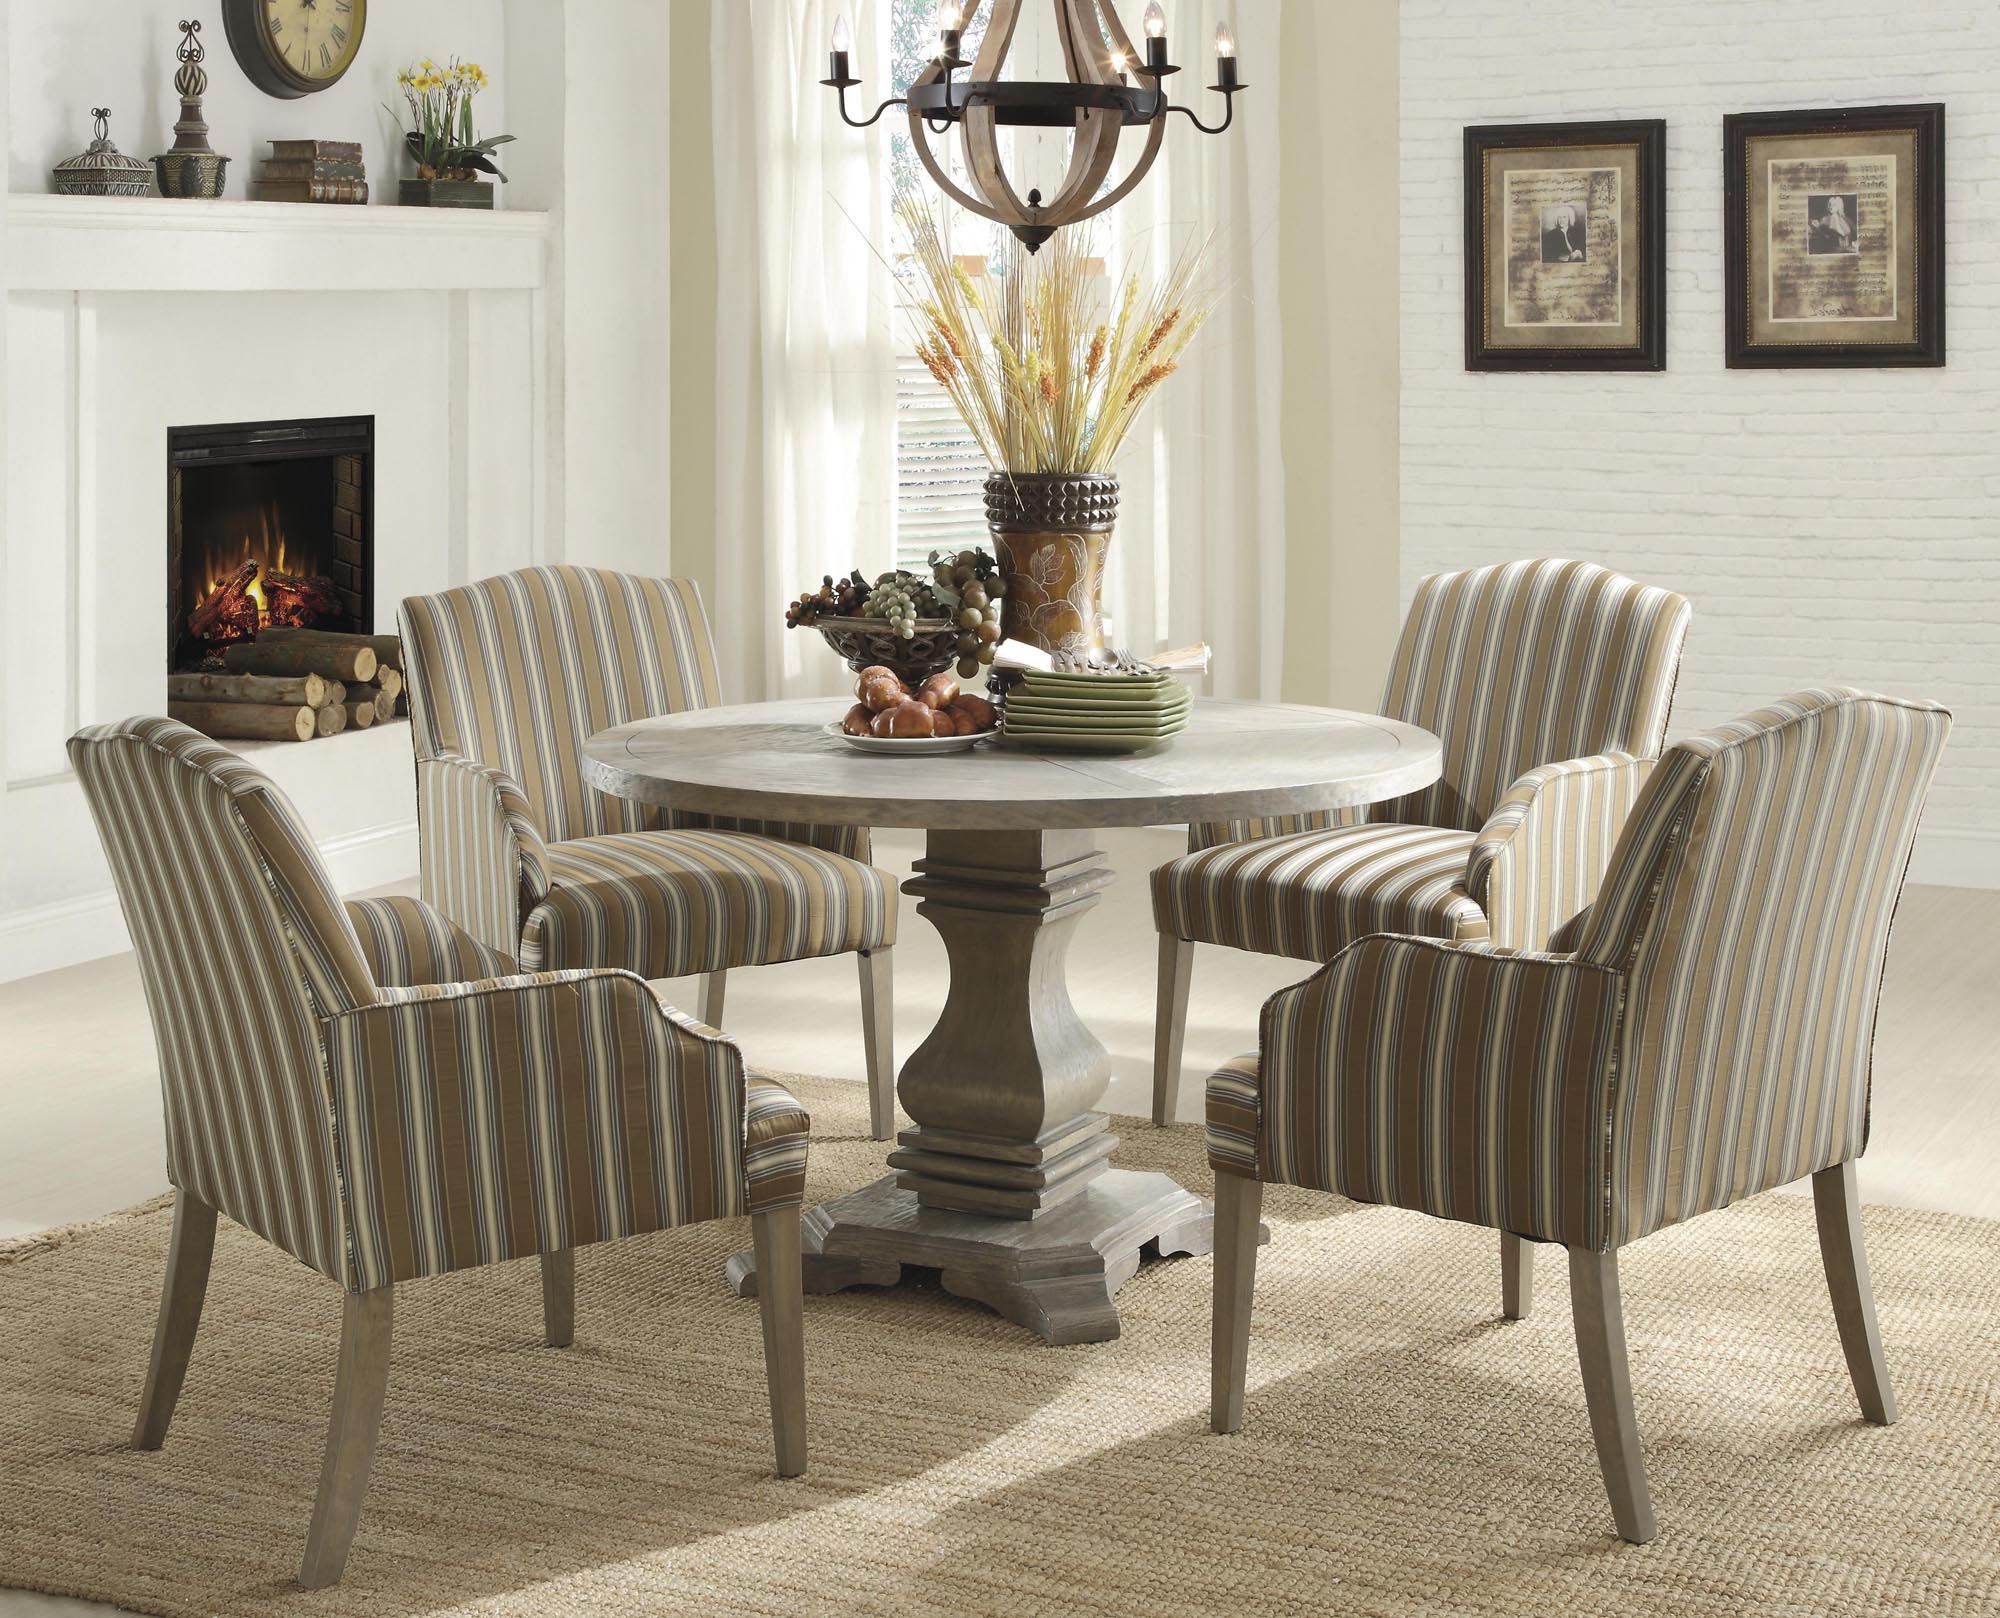 Homelegance Euro Casual 5pc Dining Table Set In Light Throughout Favorite Light Brown Round Dining Tables (View 18 of 20)